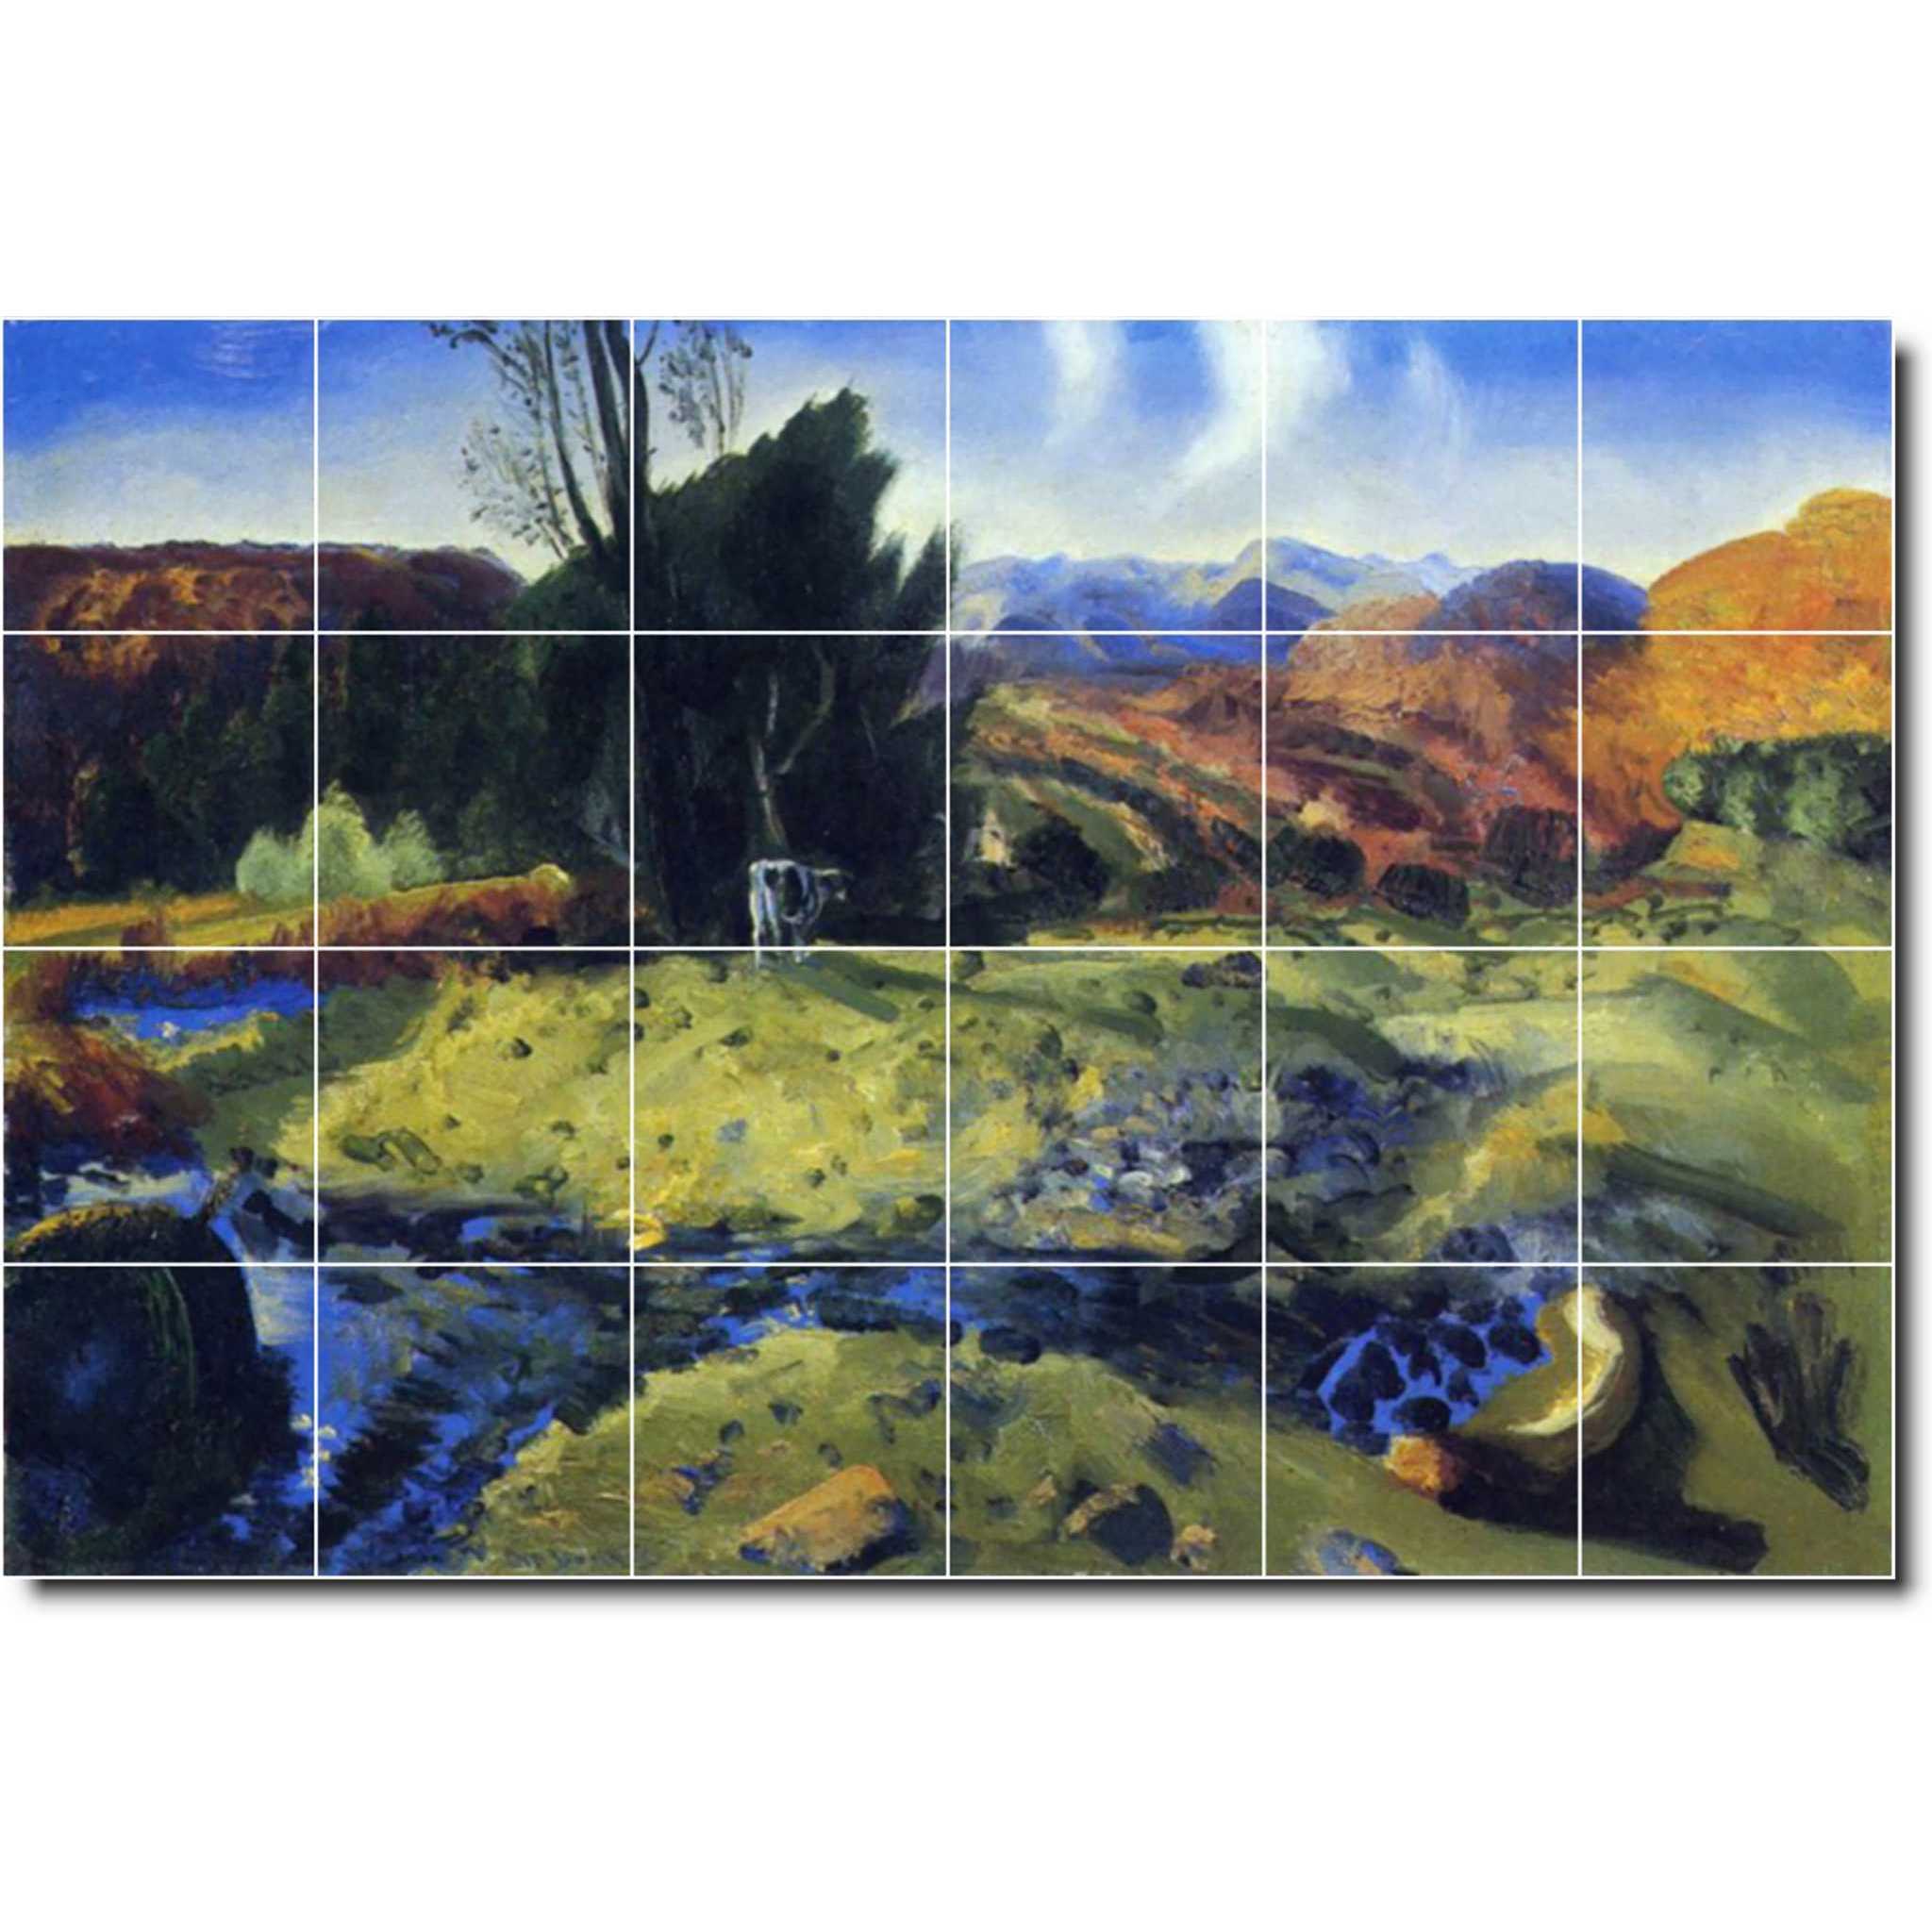 george bellows country painting ceramic tile mural p00346